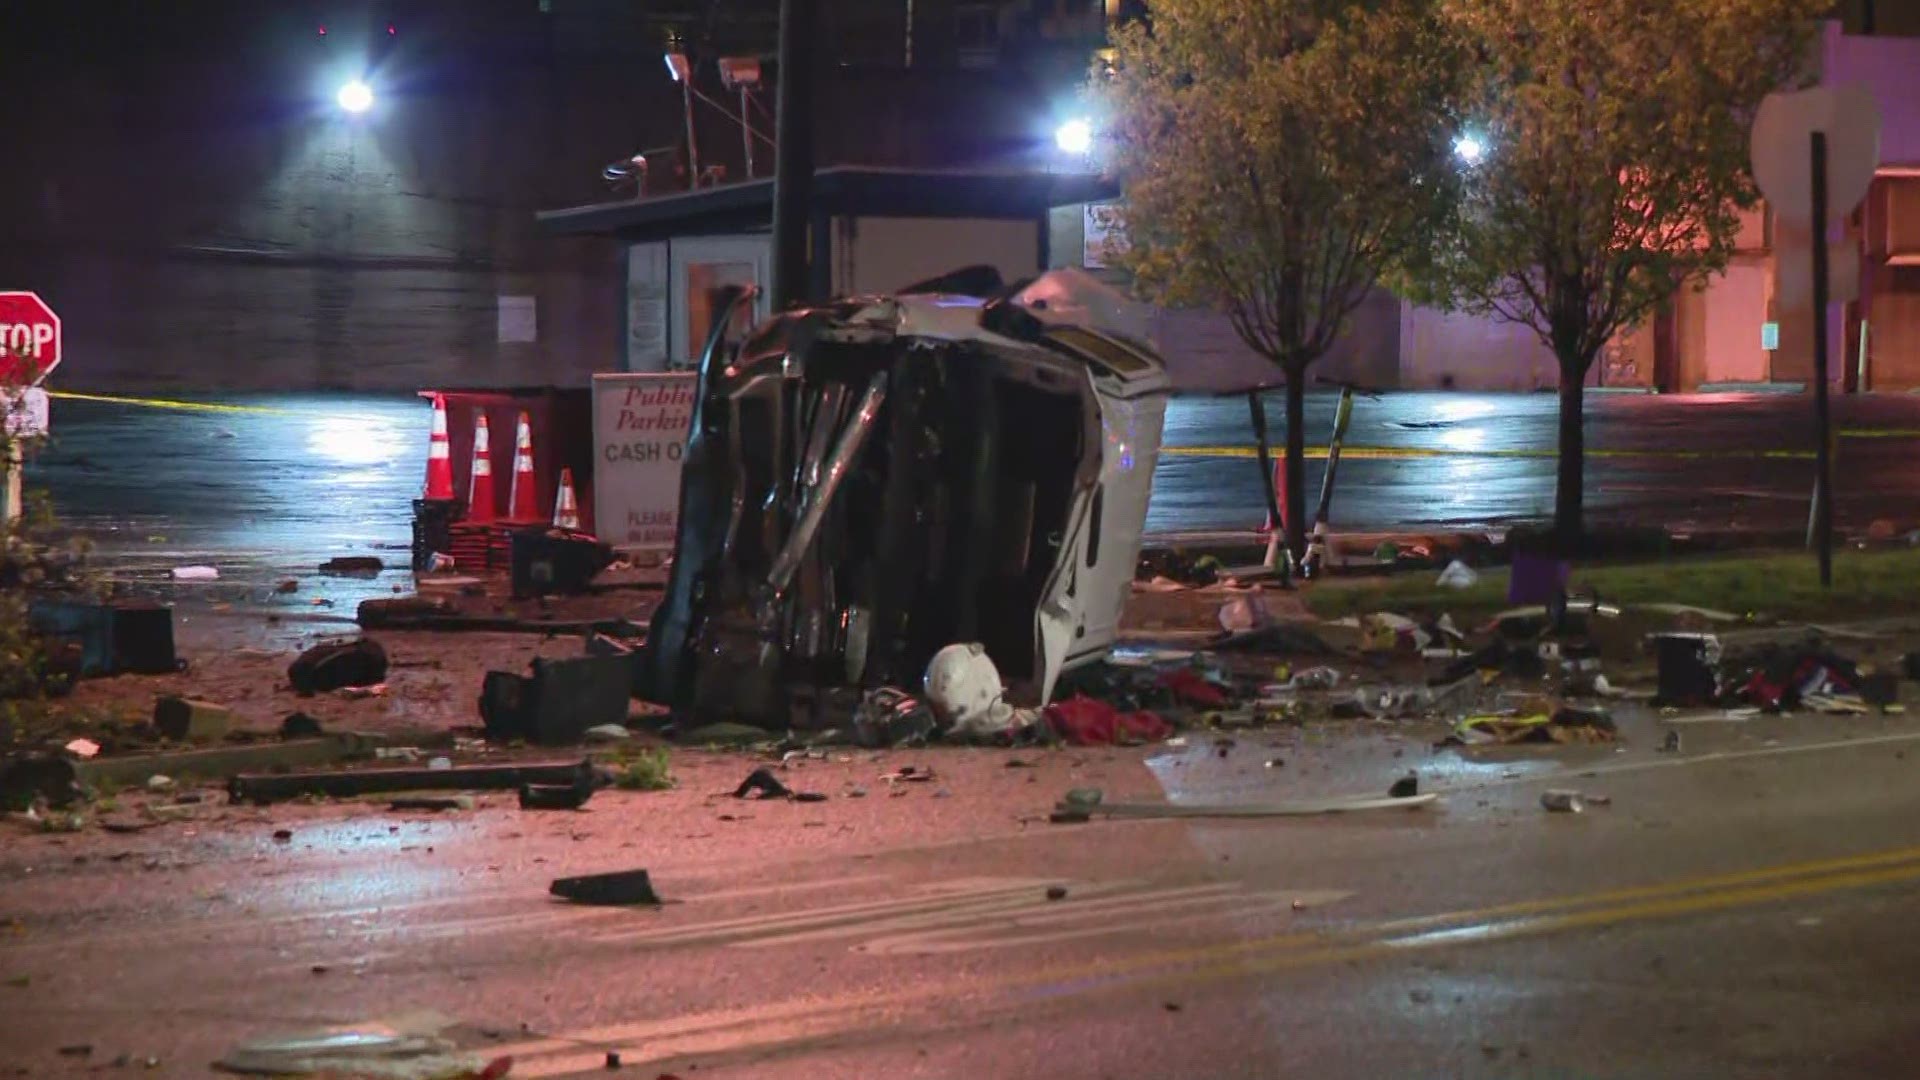 IMPD is investigating a serious crash on South Street between Pennsylvania and Meridian.